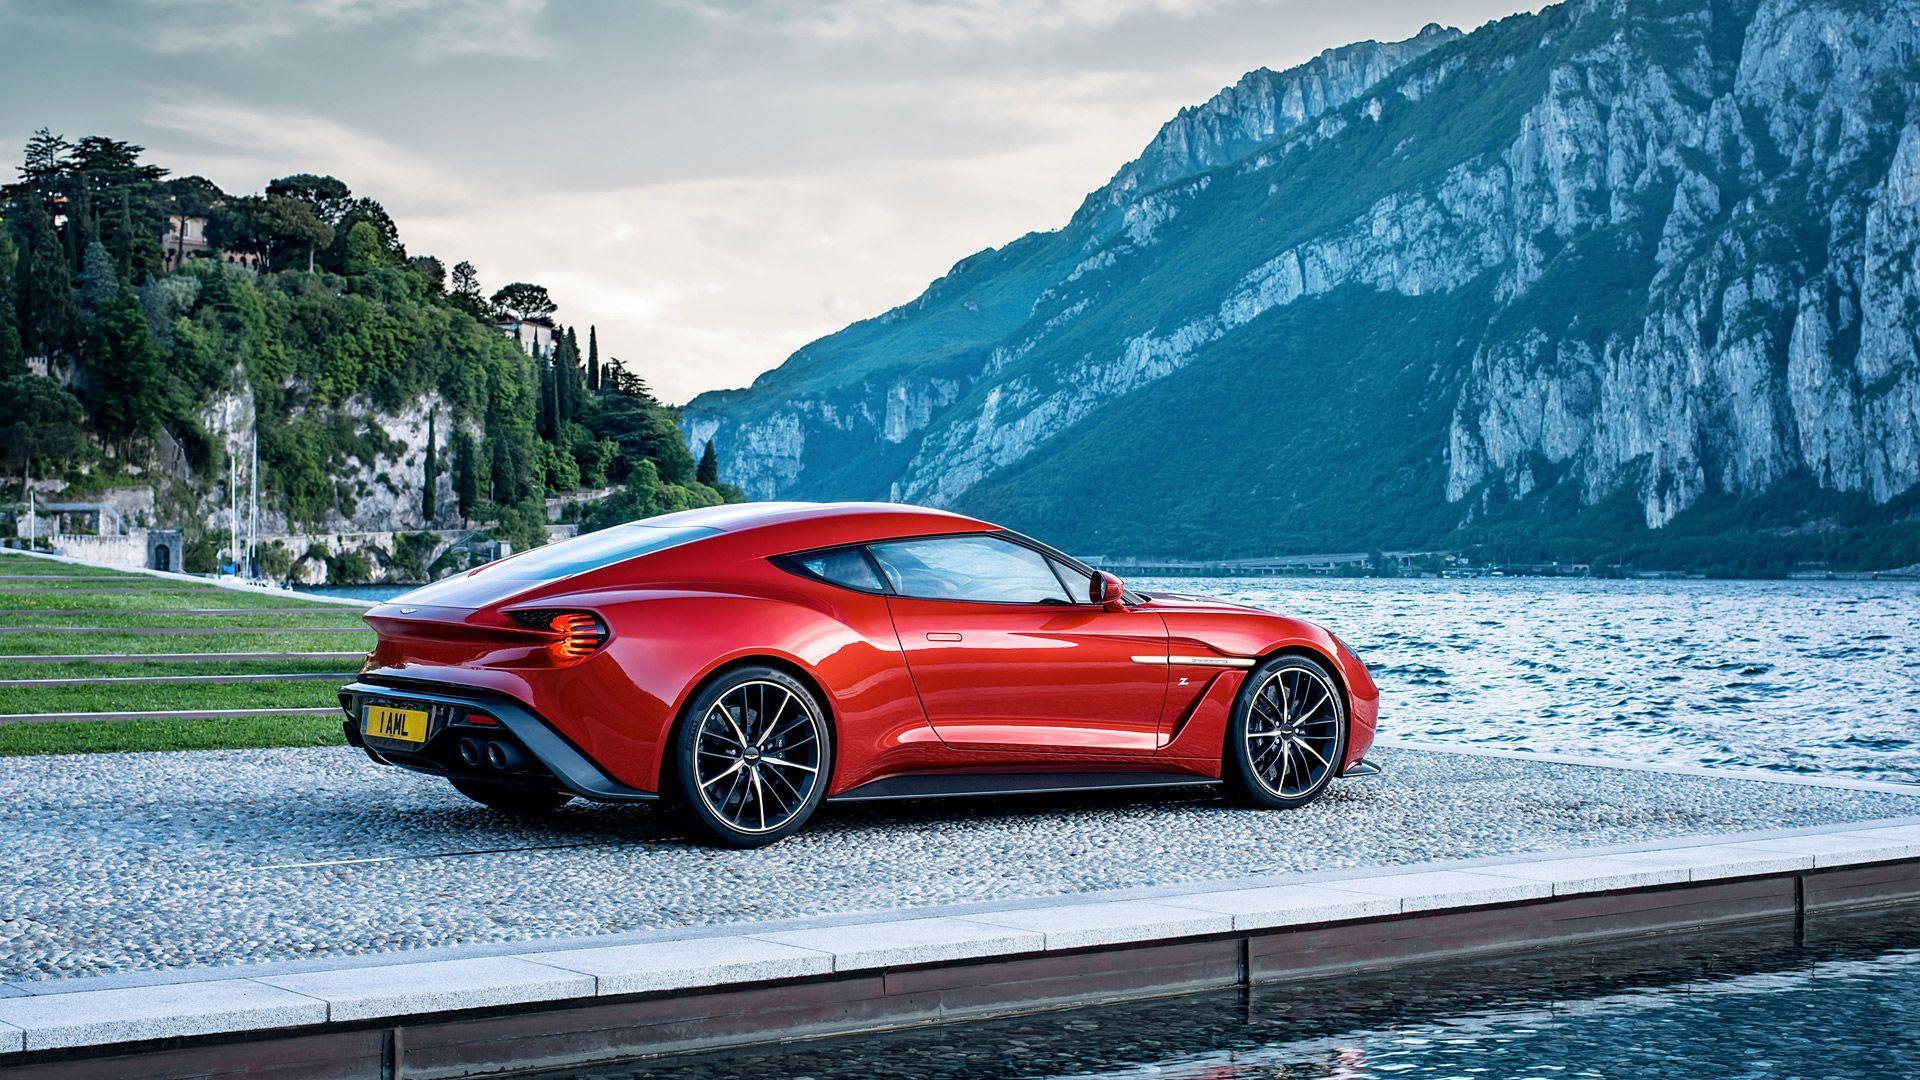 Aston Martin Hd Wallpapers For Pc